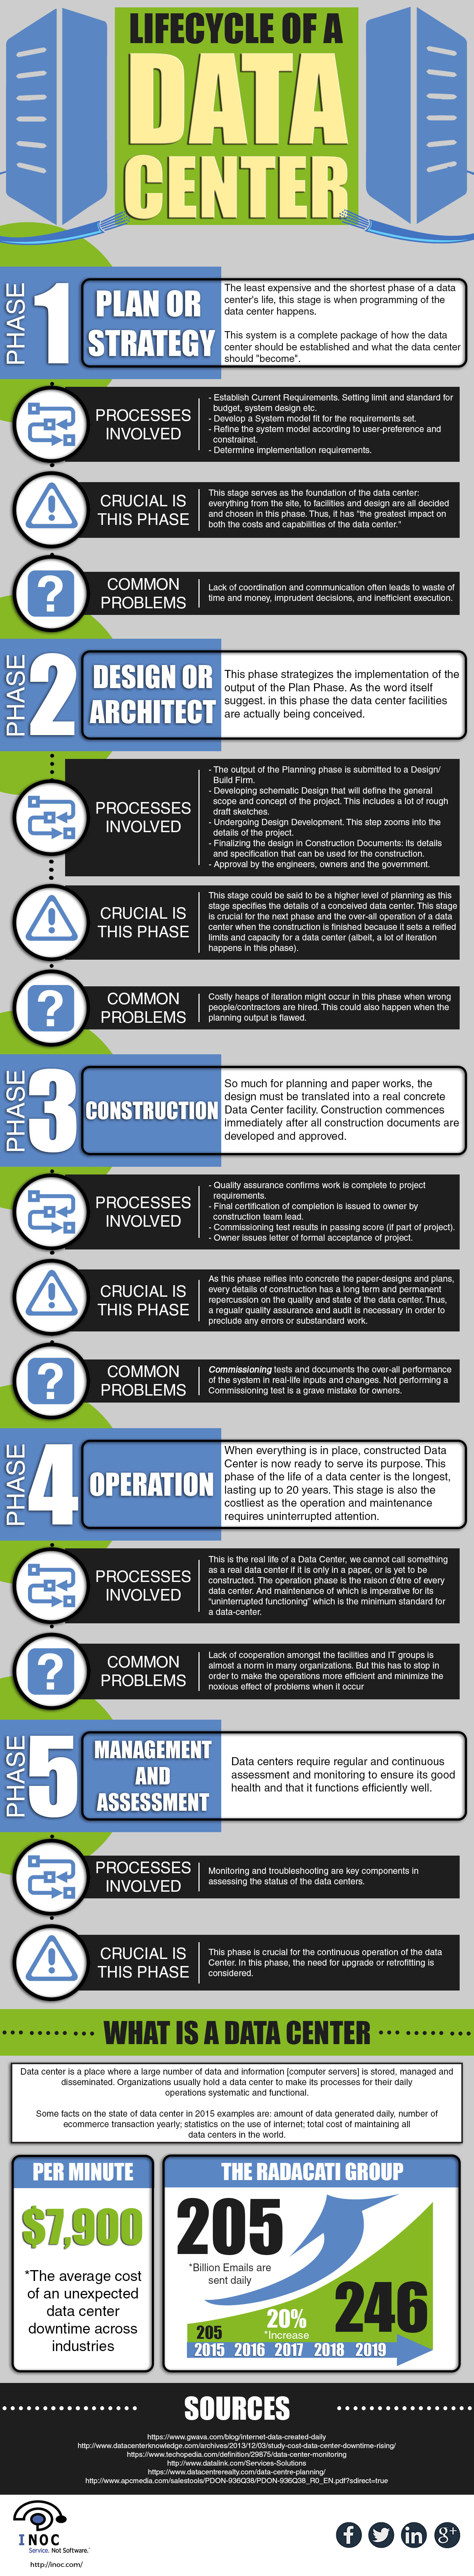 data center lifecycle infographic